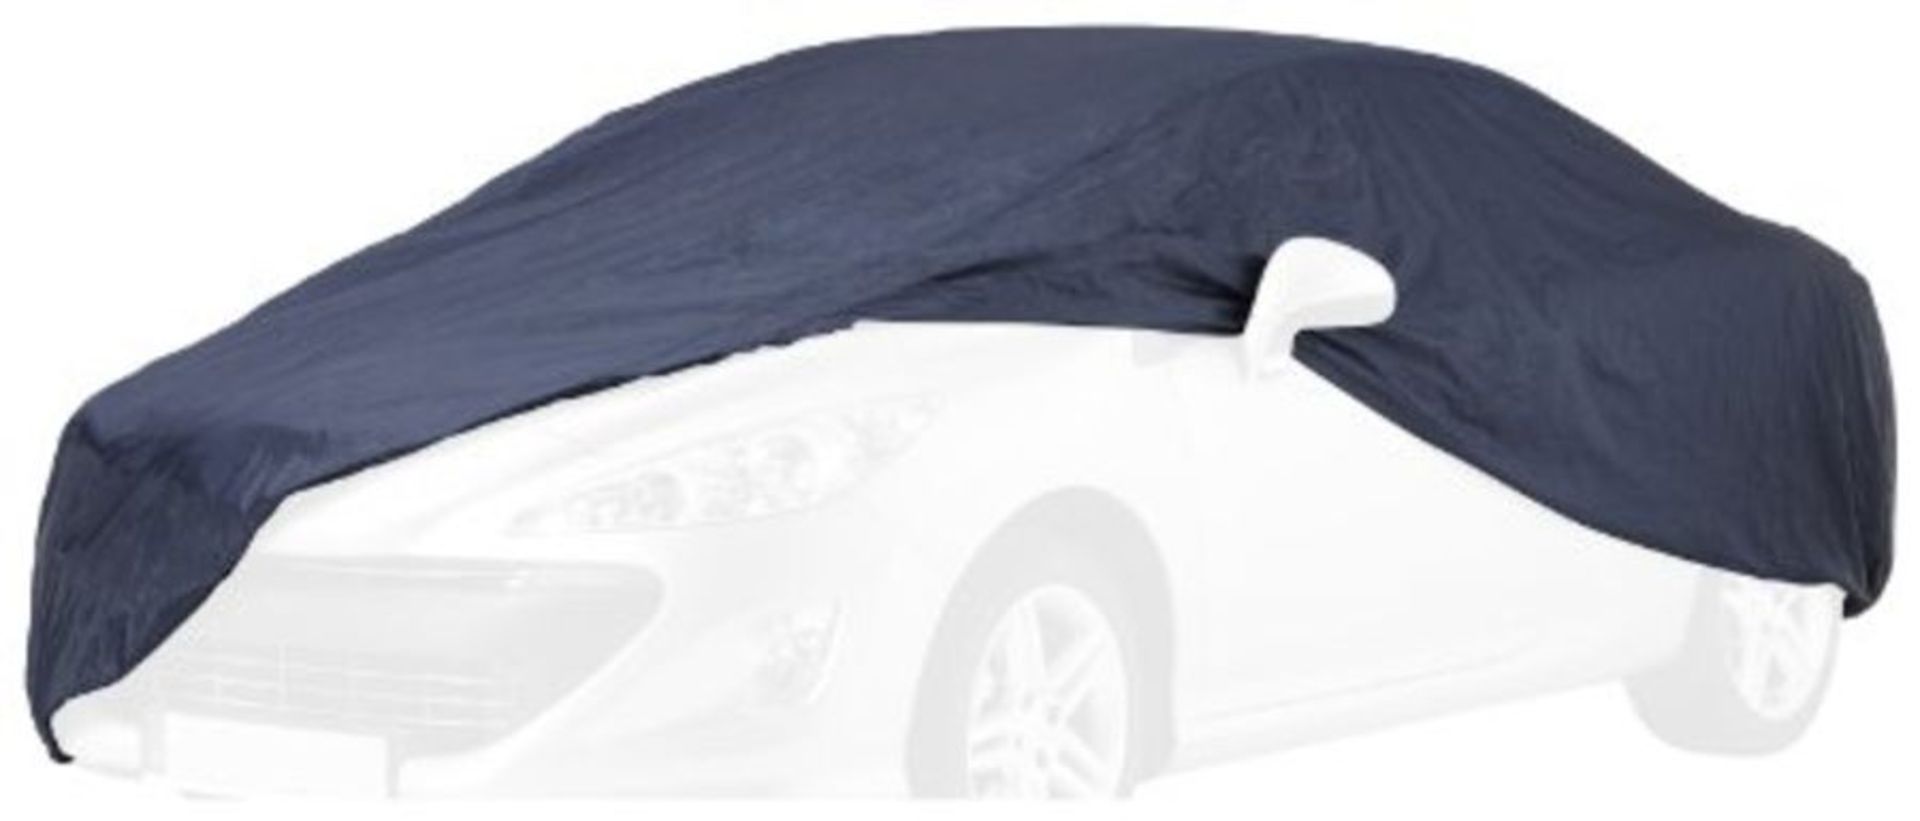 Cartrend Full car cover "New Generation", weatherproof, size S, polyester blue, for VW